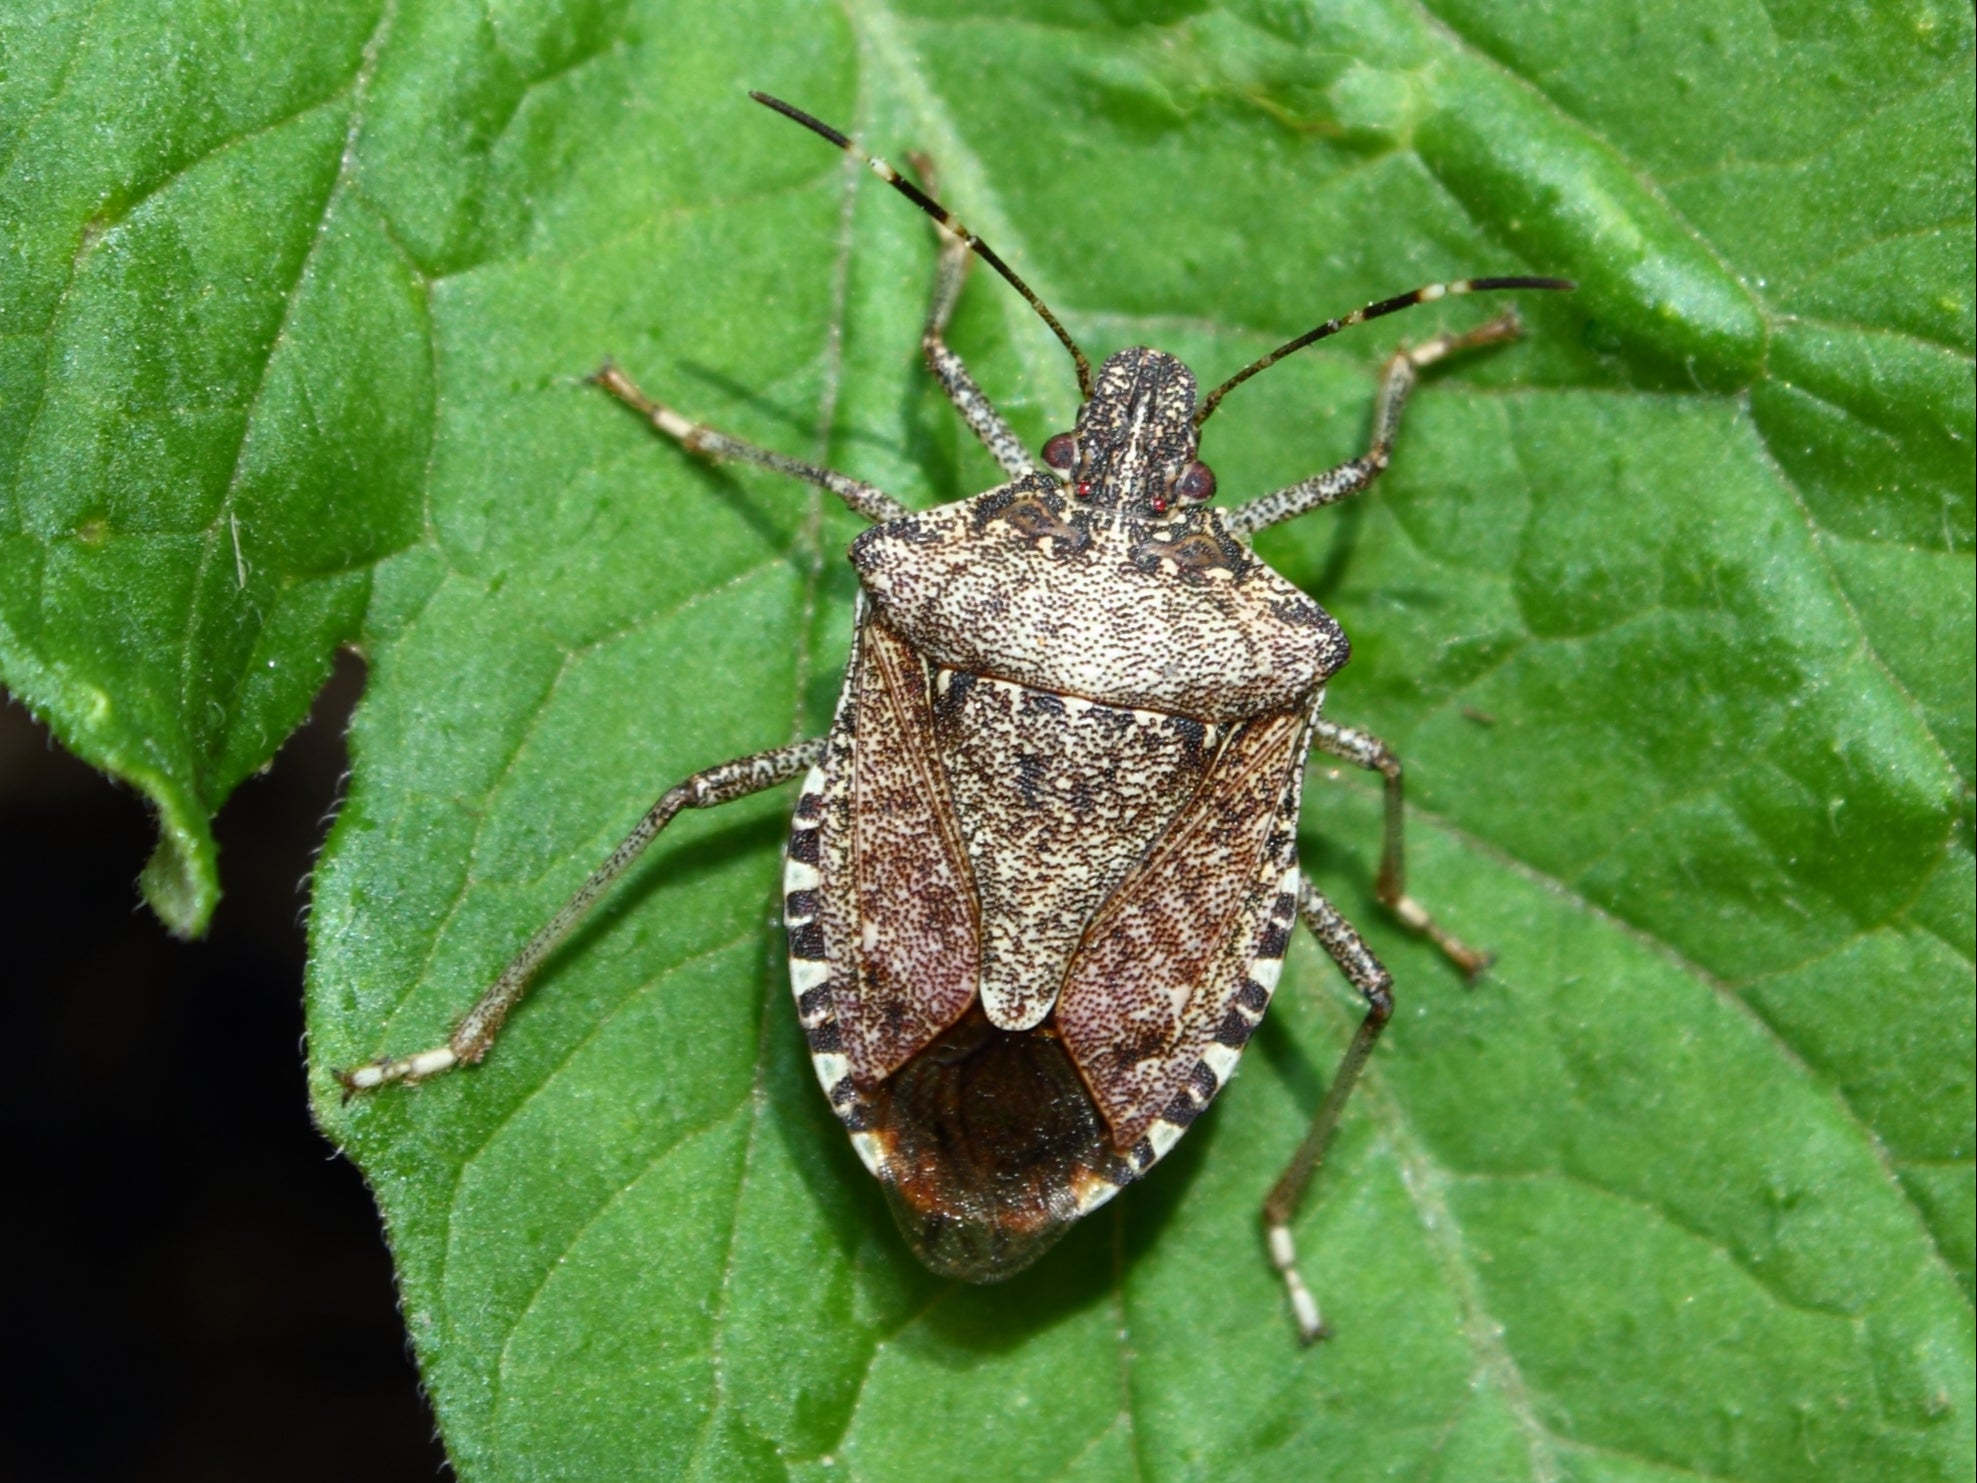 Stink bugs characteristically deposit their eggs on the underside of leaves in clusters. This stink bug was found on the leaf of a young tomato plant